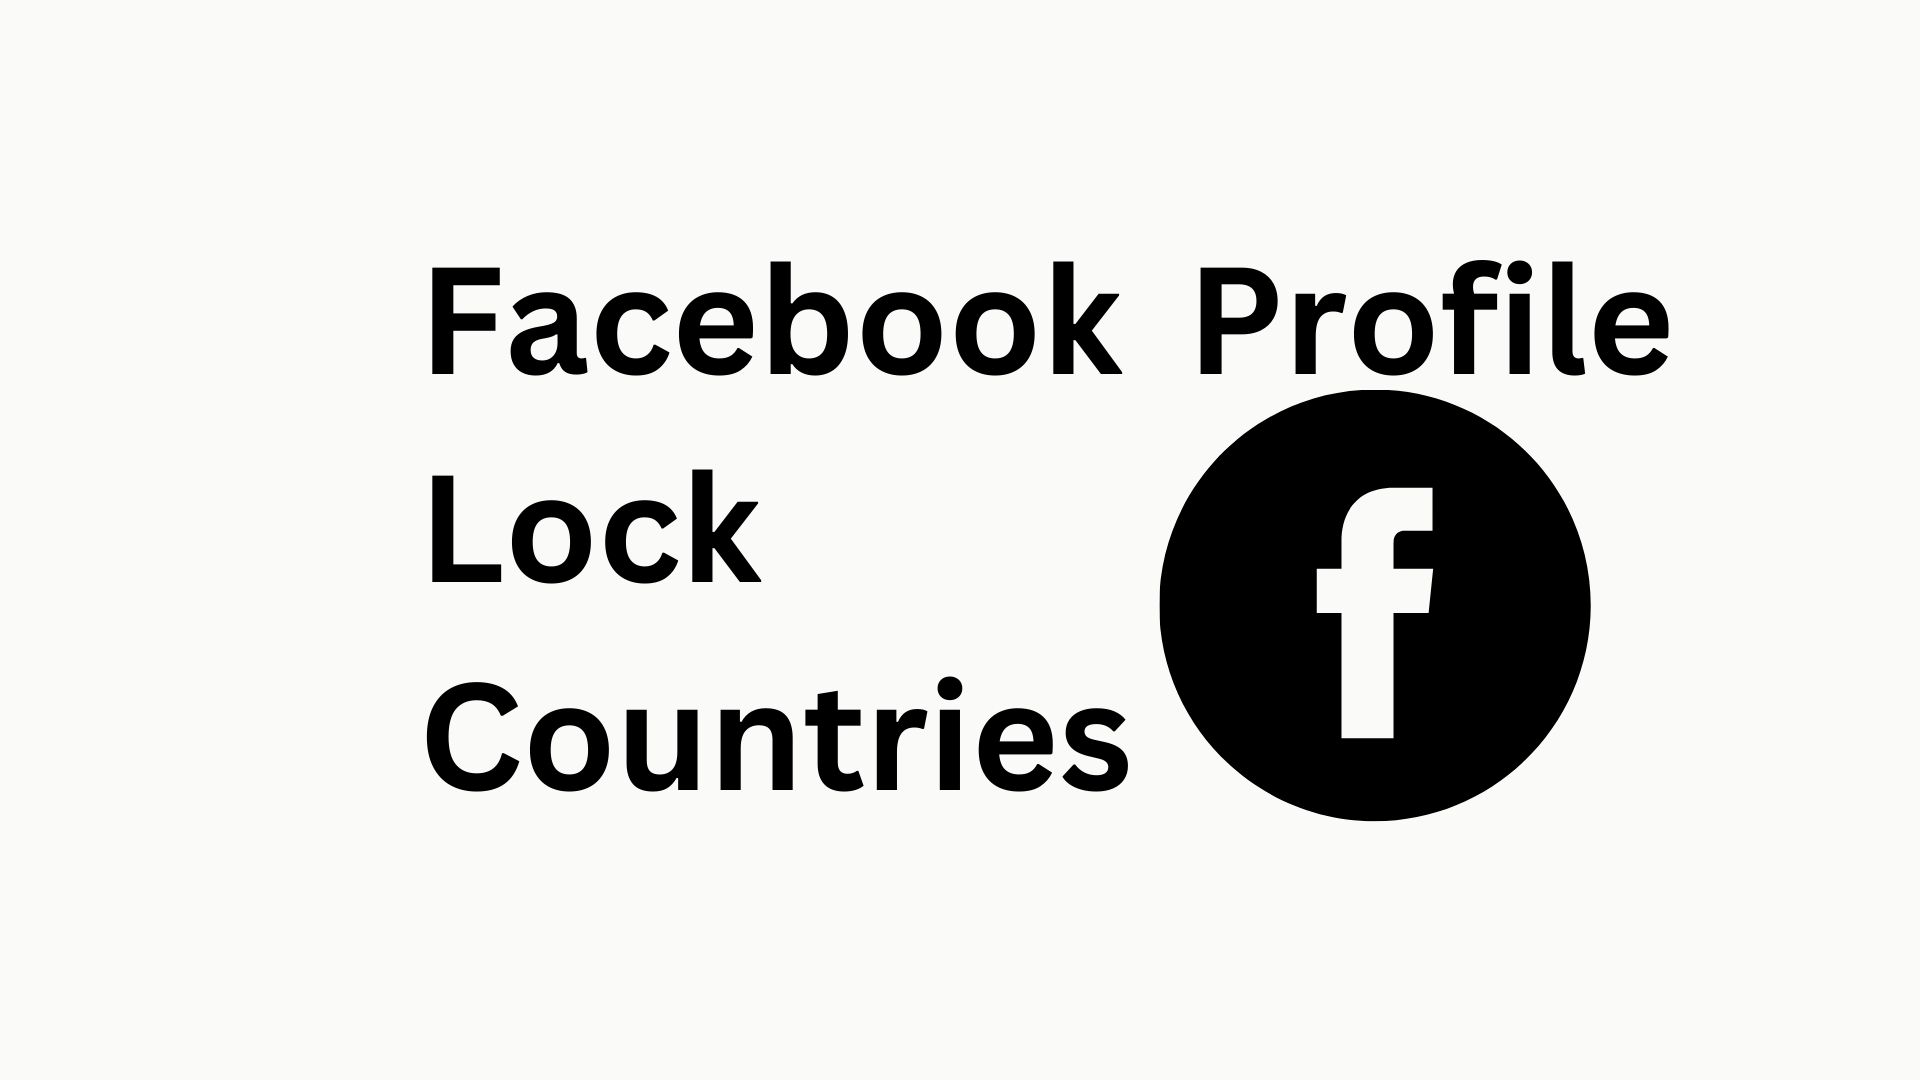 Facebook profile lock countries available